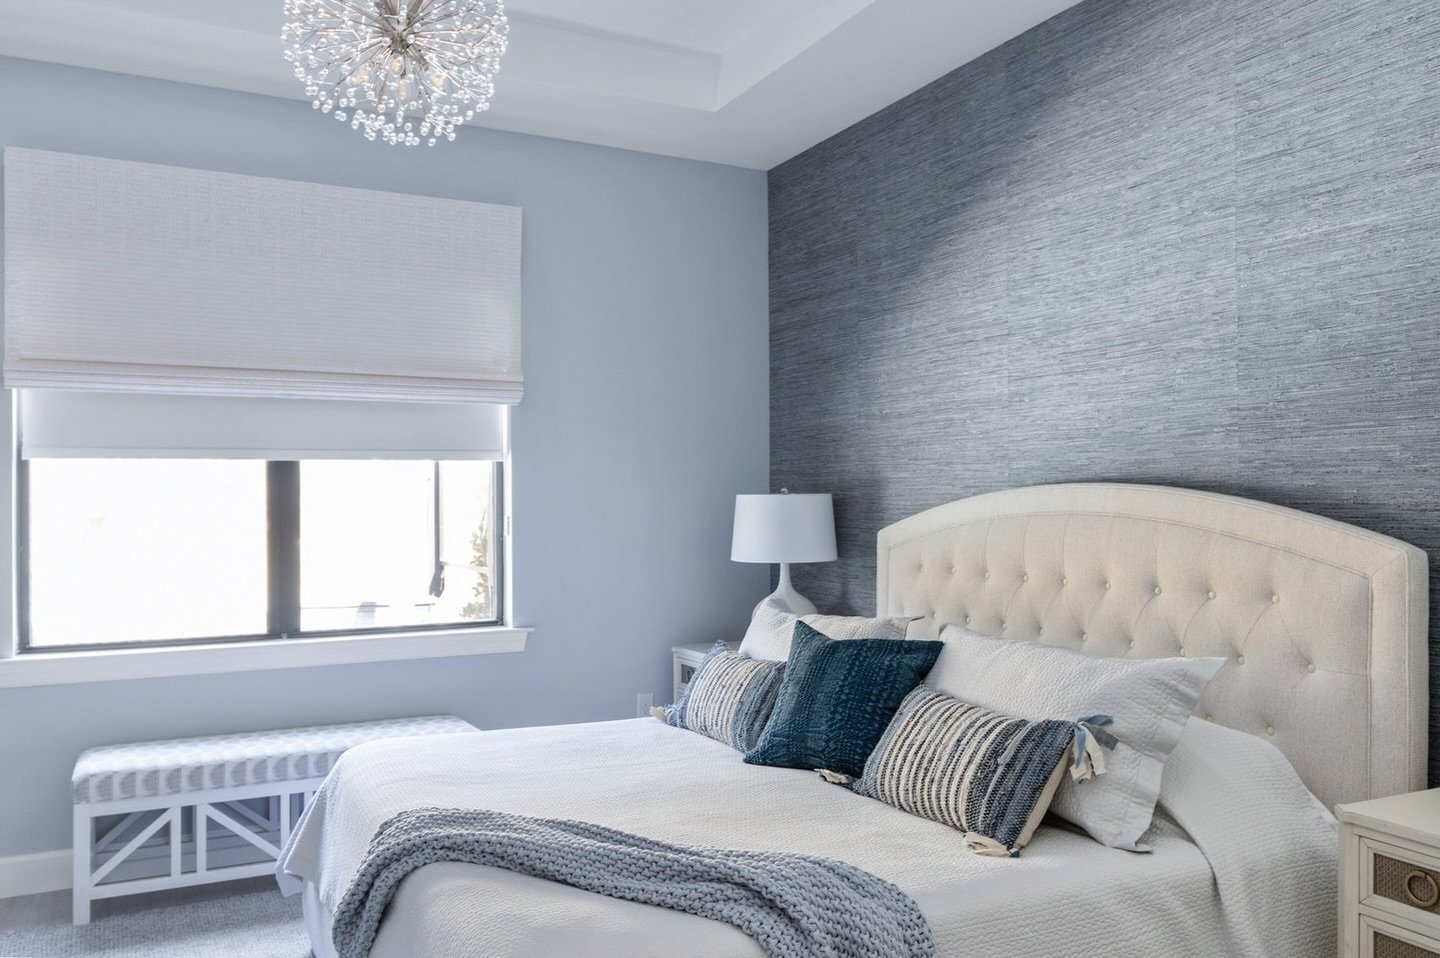 Designing a bedroom involves many selections to create a pleasing design. The layering of wallpaper, wall color, rugs, bedding, window treatments, lighting, accessories, and furniture must blend well for a compelling and inviting space. Follow along 